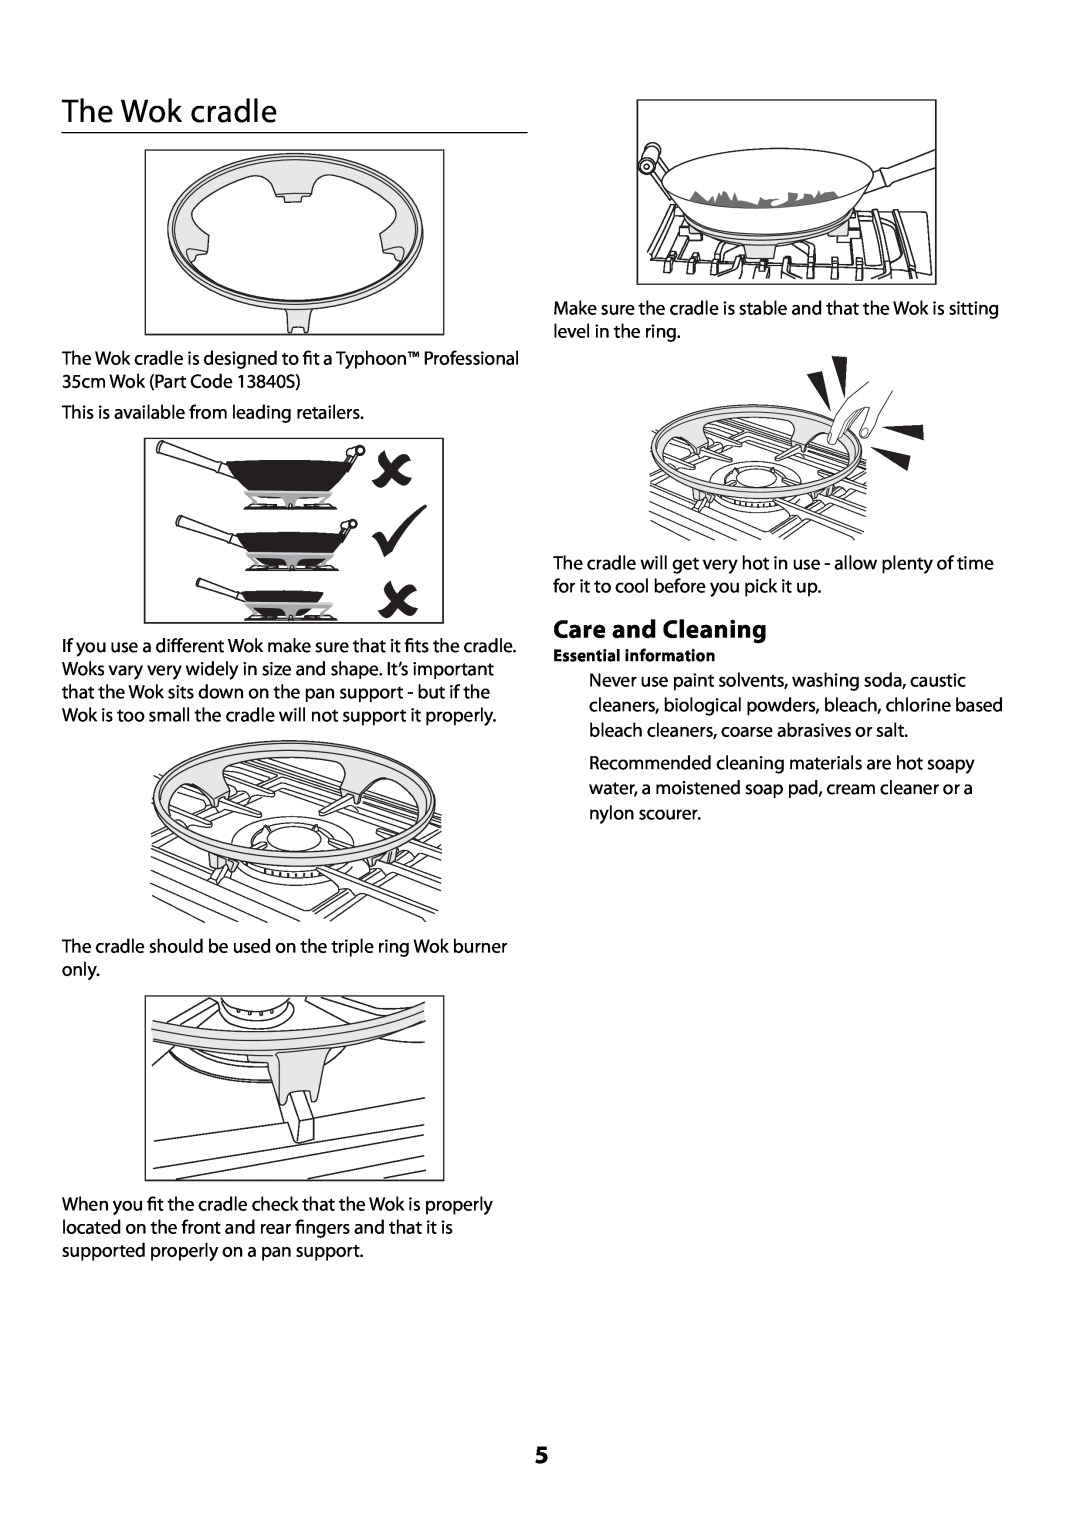 Rangemaster U109300 - 01 manual The Wok cradle, Care and Cleaning 